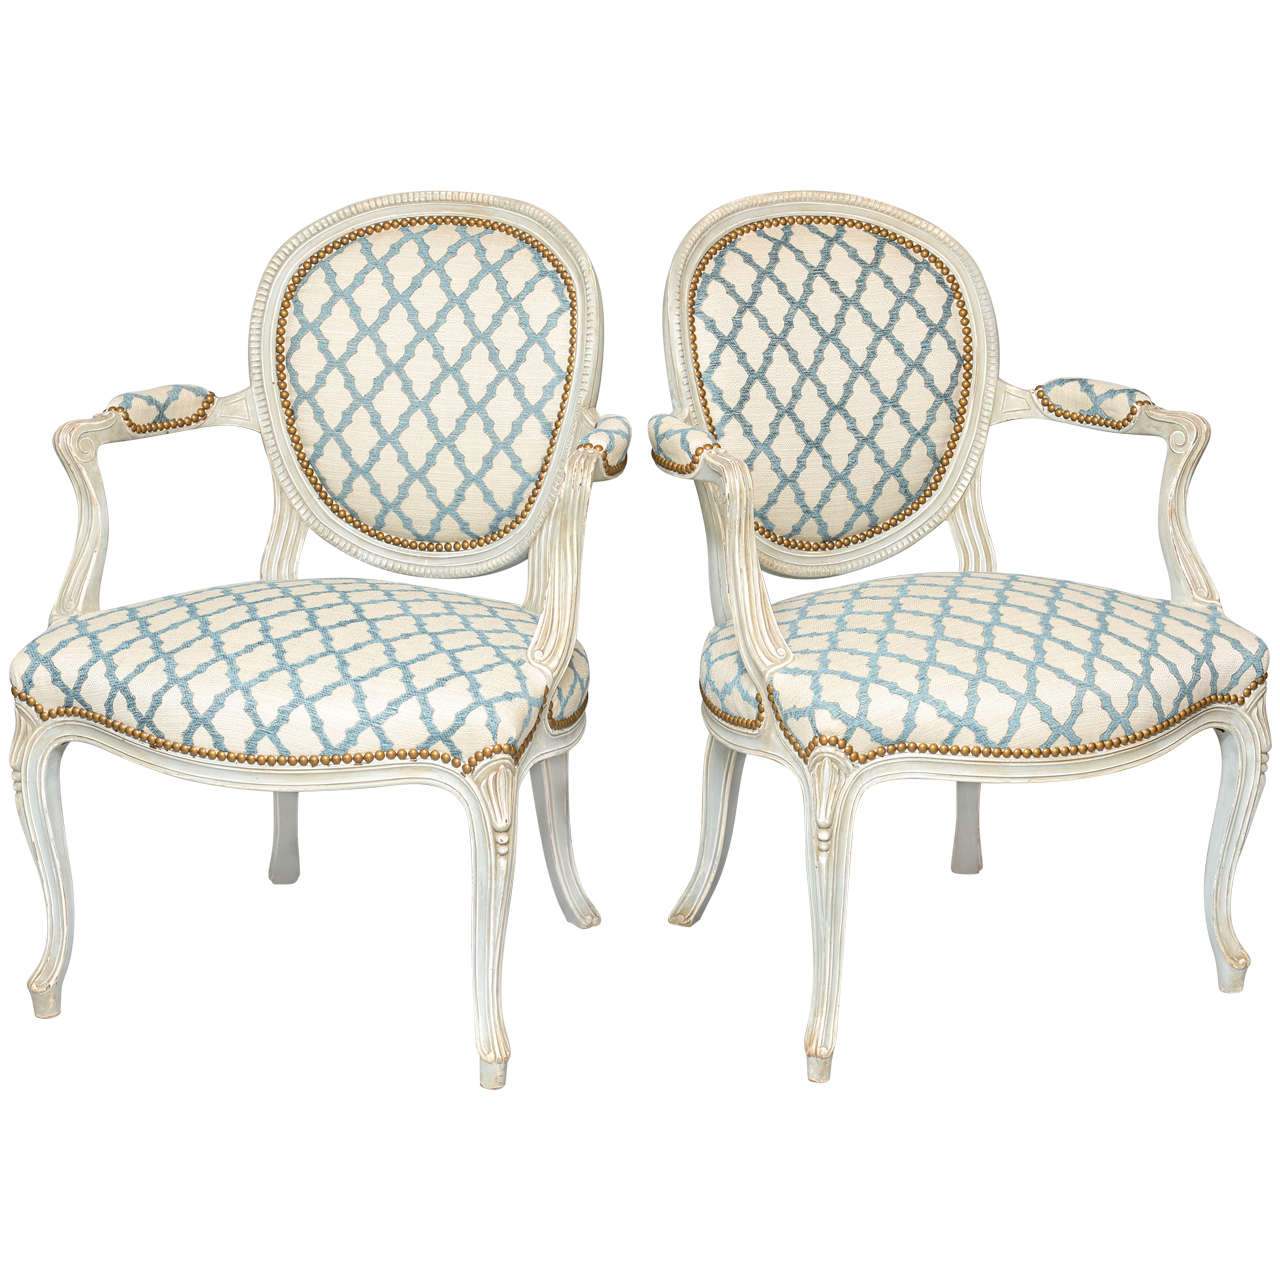 Pair of Painted Fauteuils